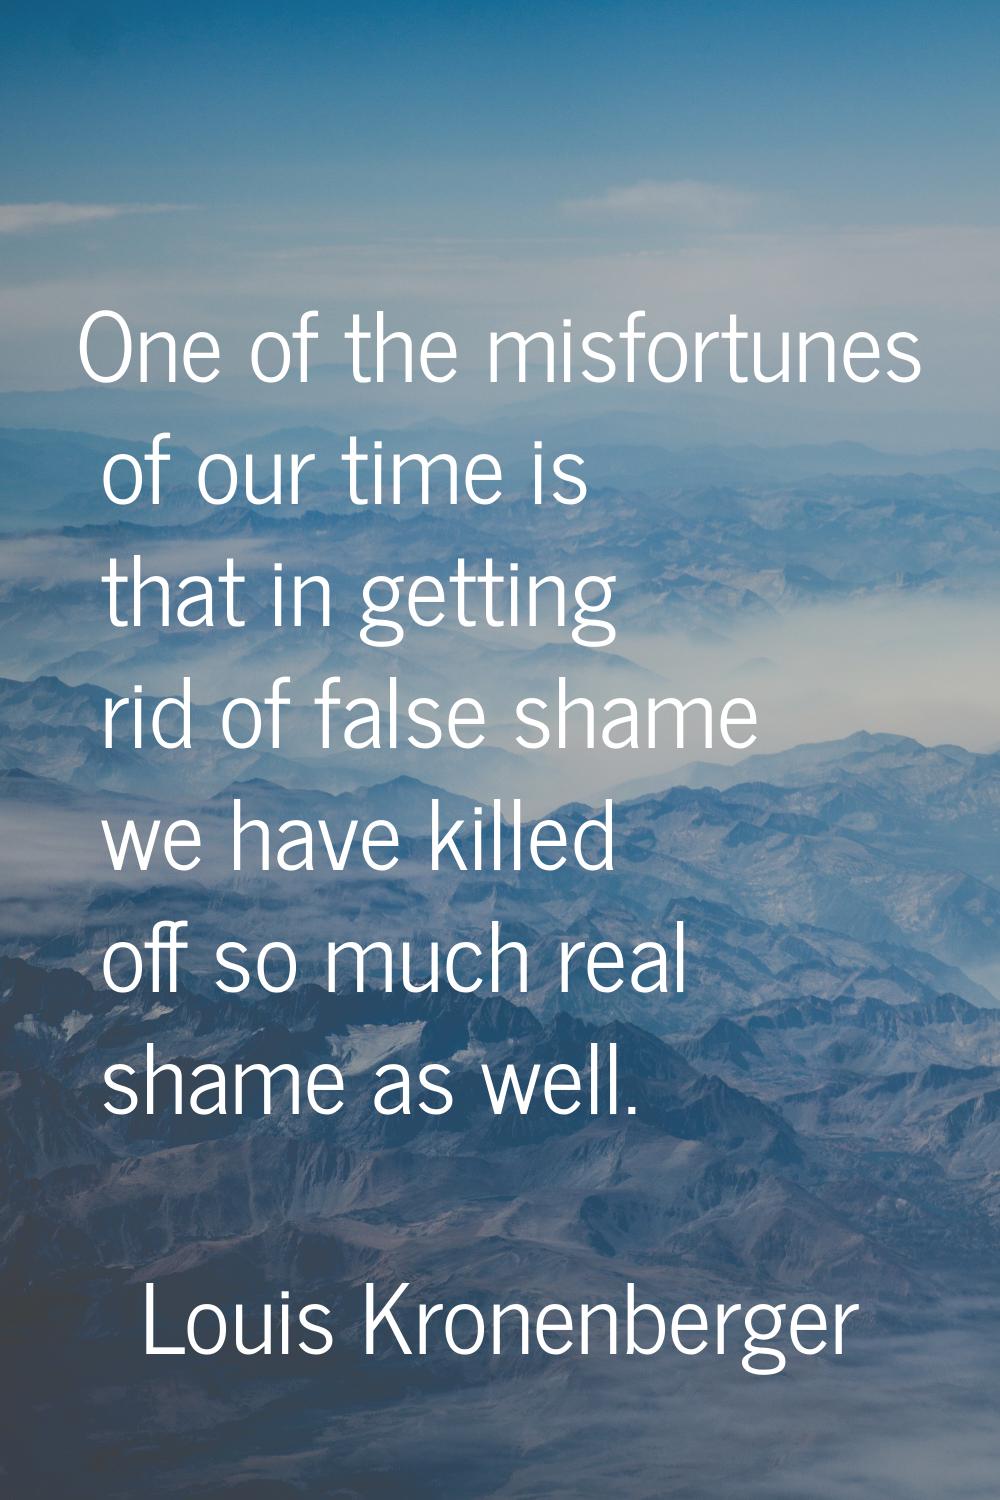 One of the misfortunes of our time is that in getting rid of false shame we have killed off so much